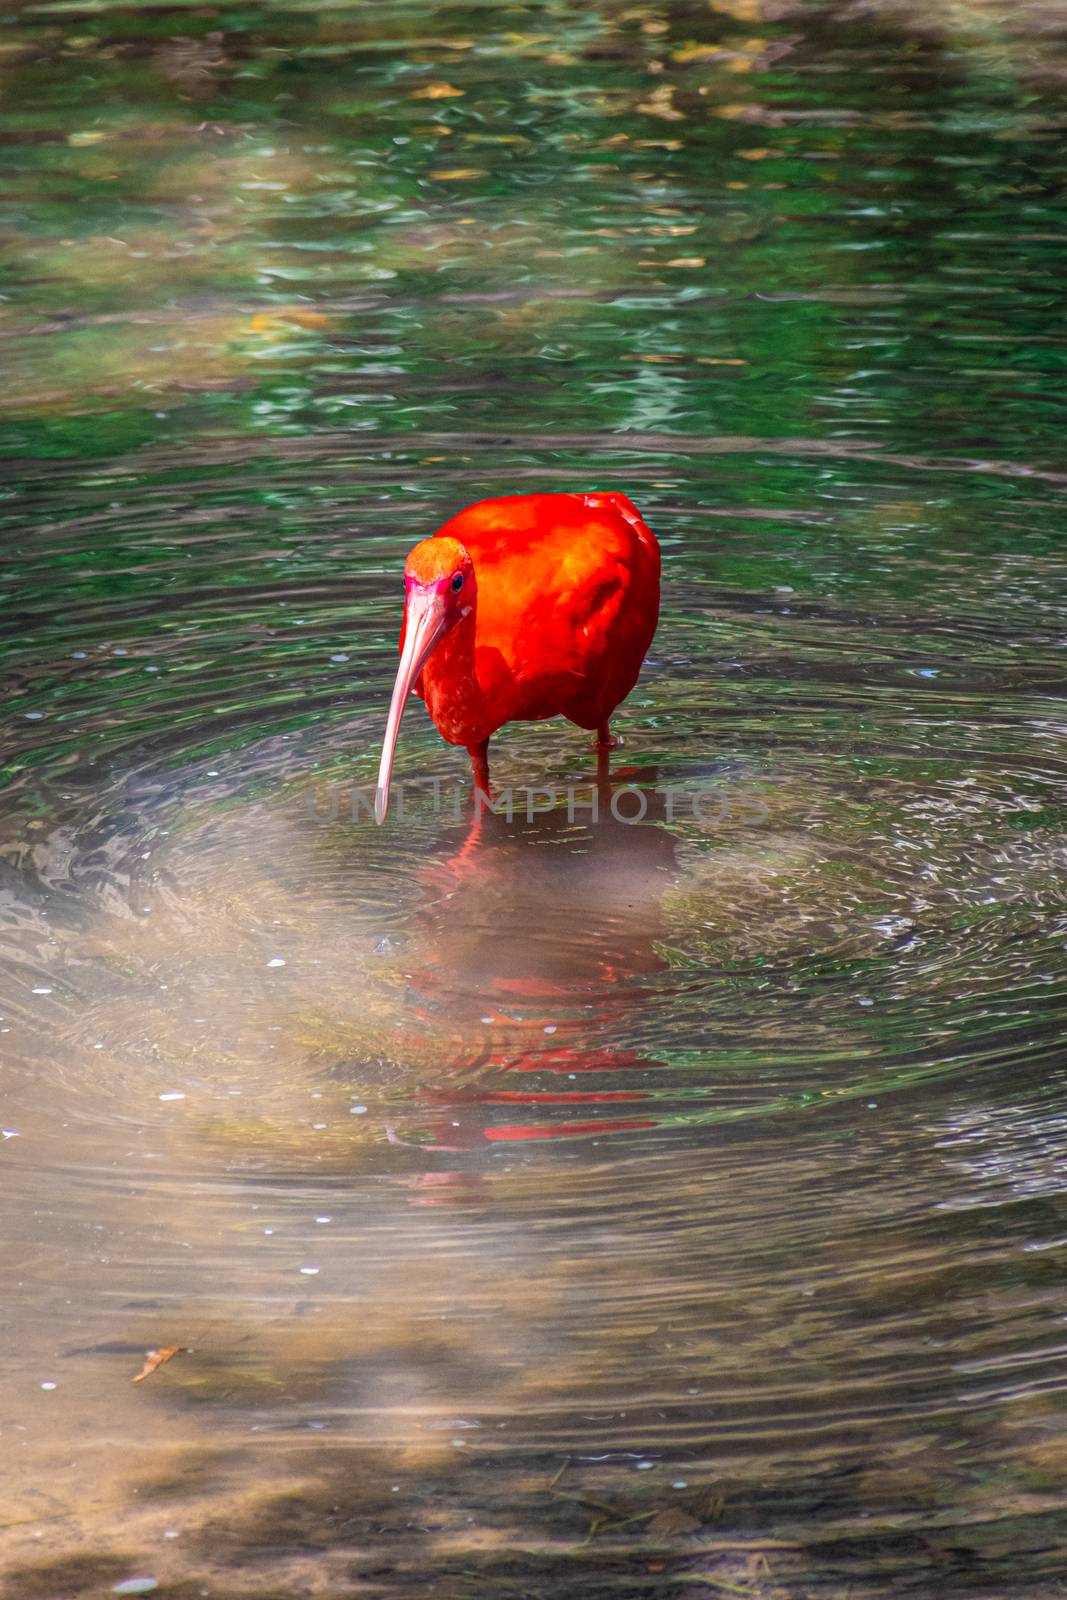 Scarlet ibis with red feathers and beak walking through shallow water by MXW_Stock